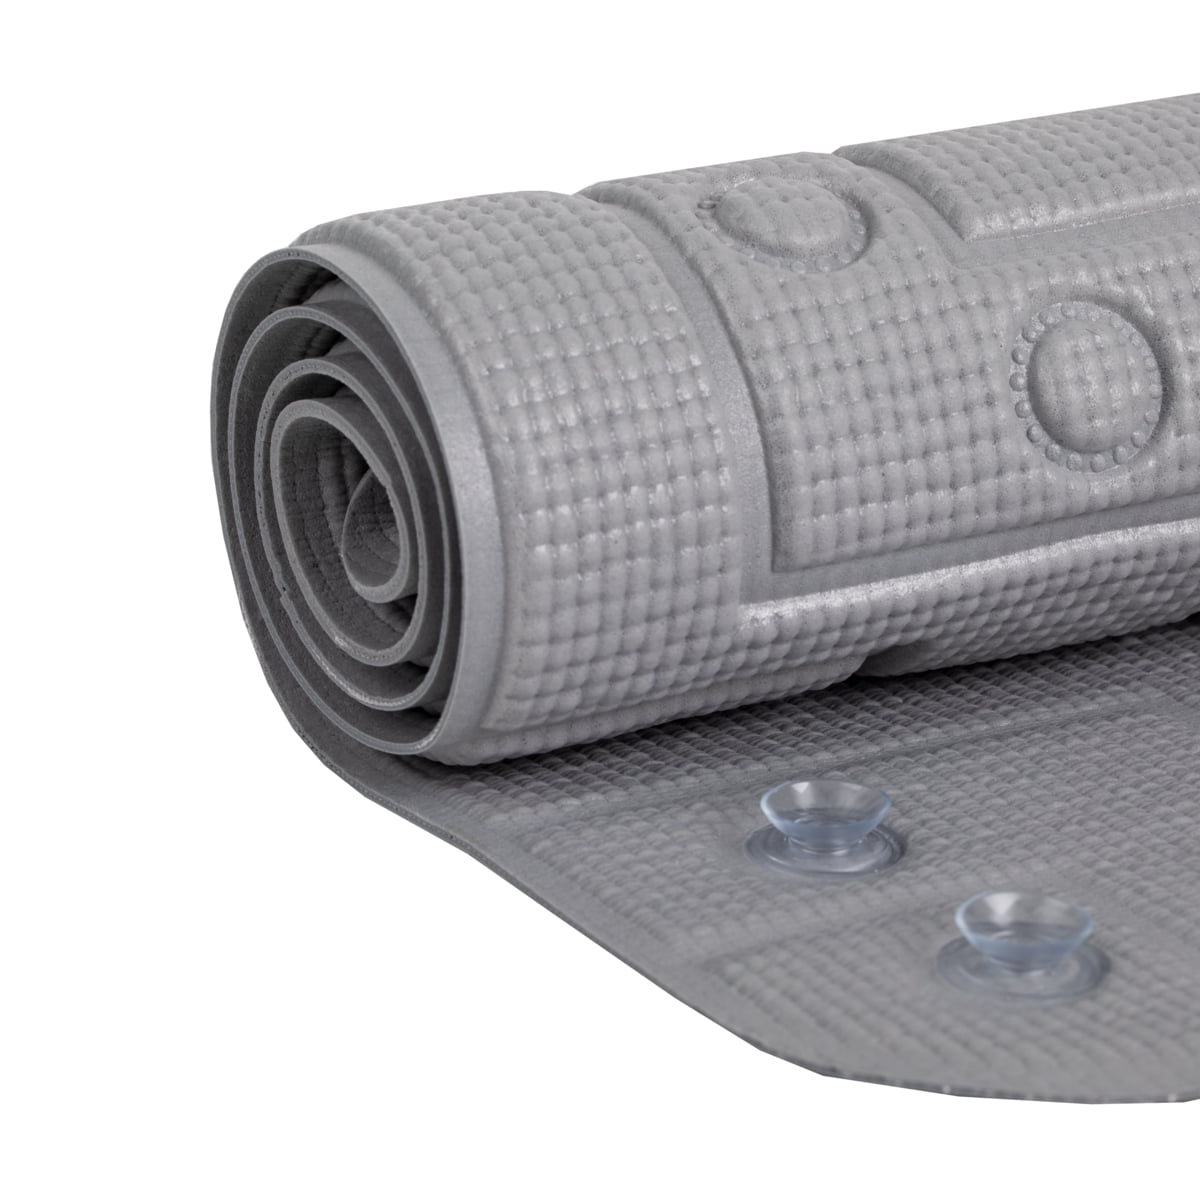 Buy Wet Step Indoor/Outdoor Mat (3' x 5' Grey)–Non-Slip Antimicrobial  Drainable Soft and Comfortable Anti-igue Mat for Wet Areas – Locker Room,  Shower, Swimming Pool Deck, Spa, Bathroom, by M+A Matting Online